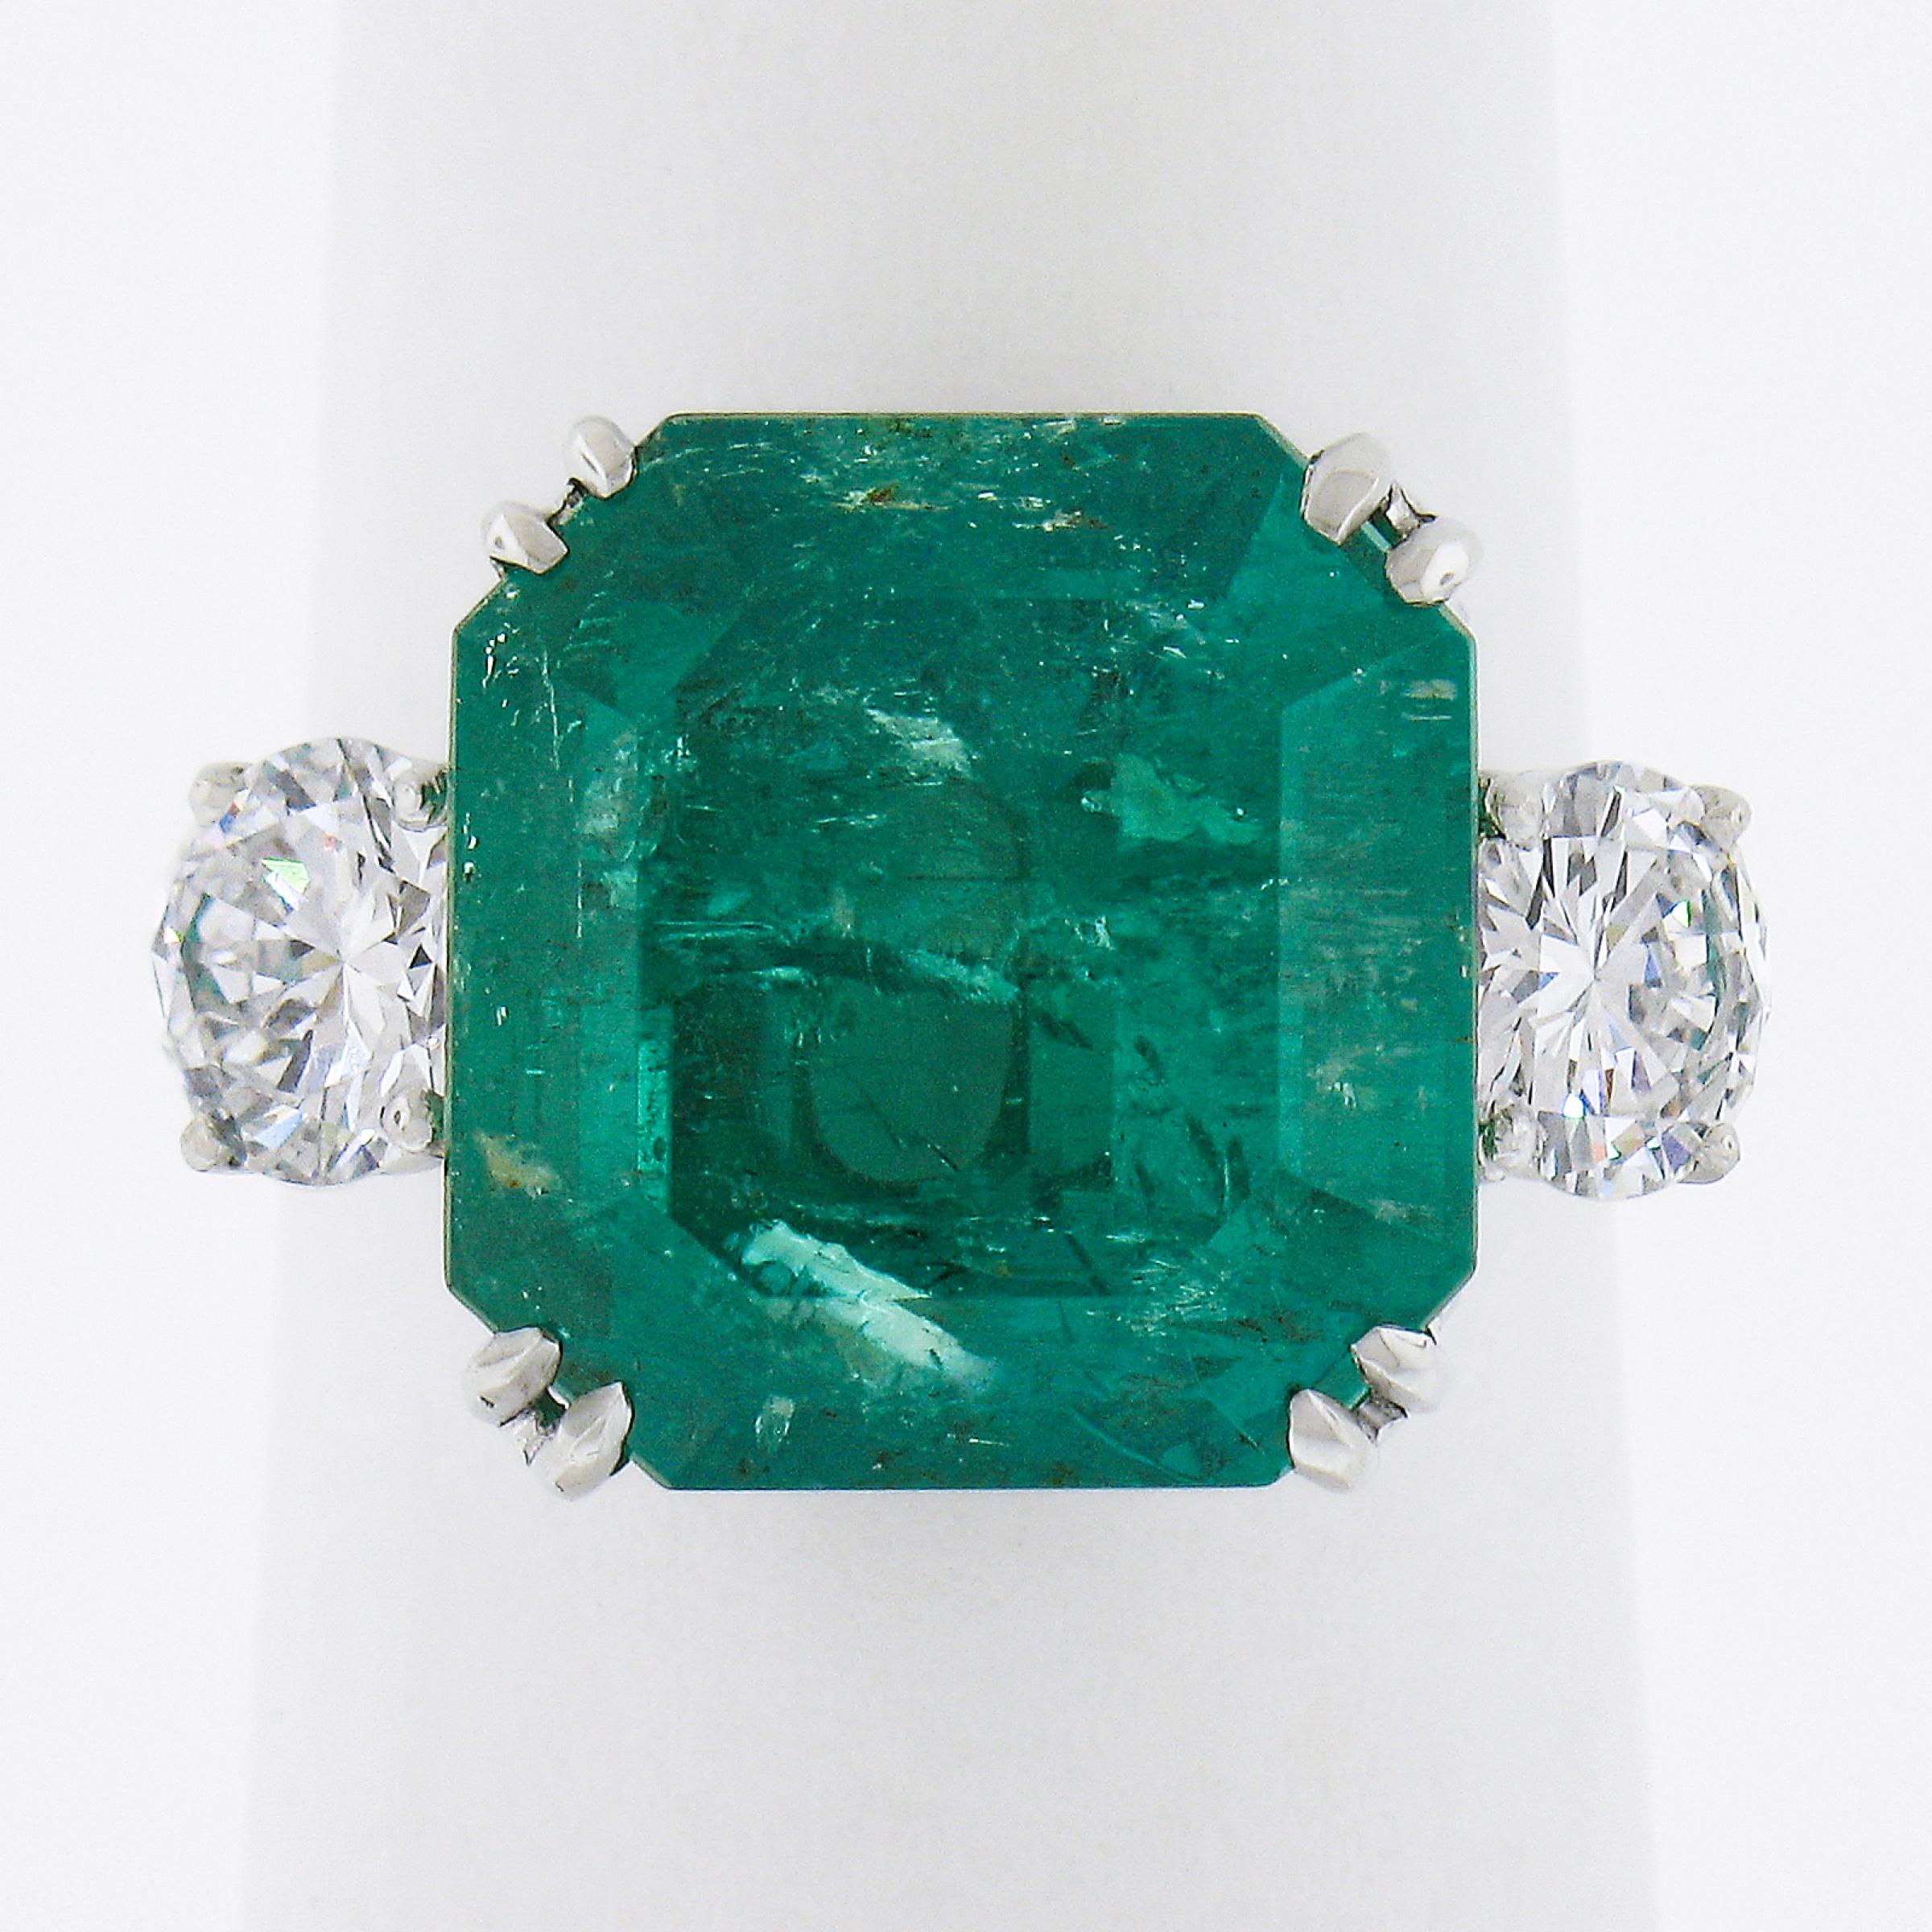 --Stone(s):--
(1) Natural Genuine Emerald - Square Cut - Minor Oil - Dual Prong Set - Lively Bright Green Color w/ Natural Inclusions - 9.26ct (exact - certified)
** See Certification Details Below for Complete Info **
(2) Natural Genuine Diamonds -